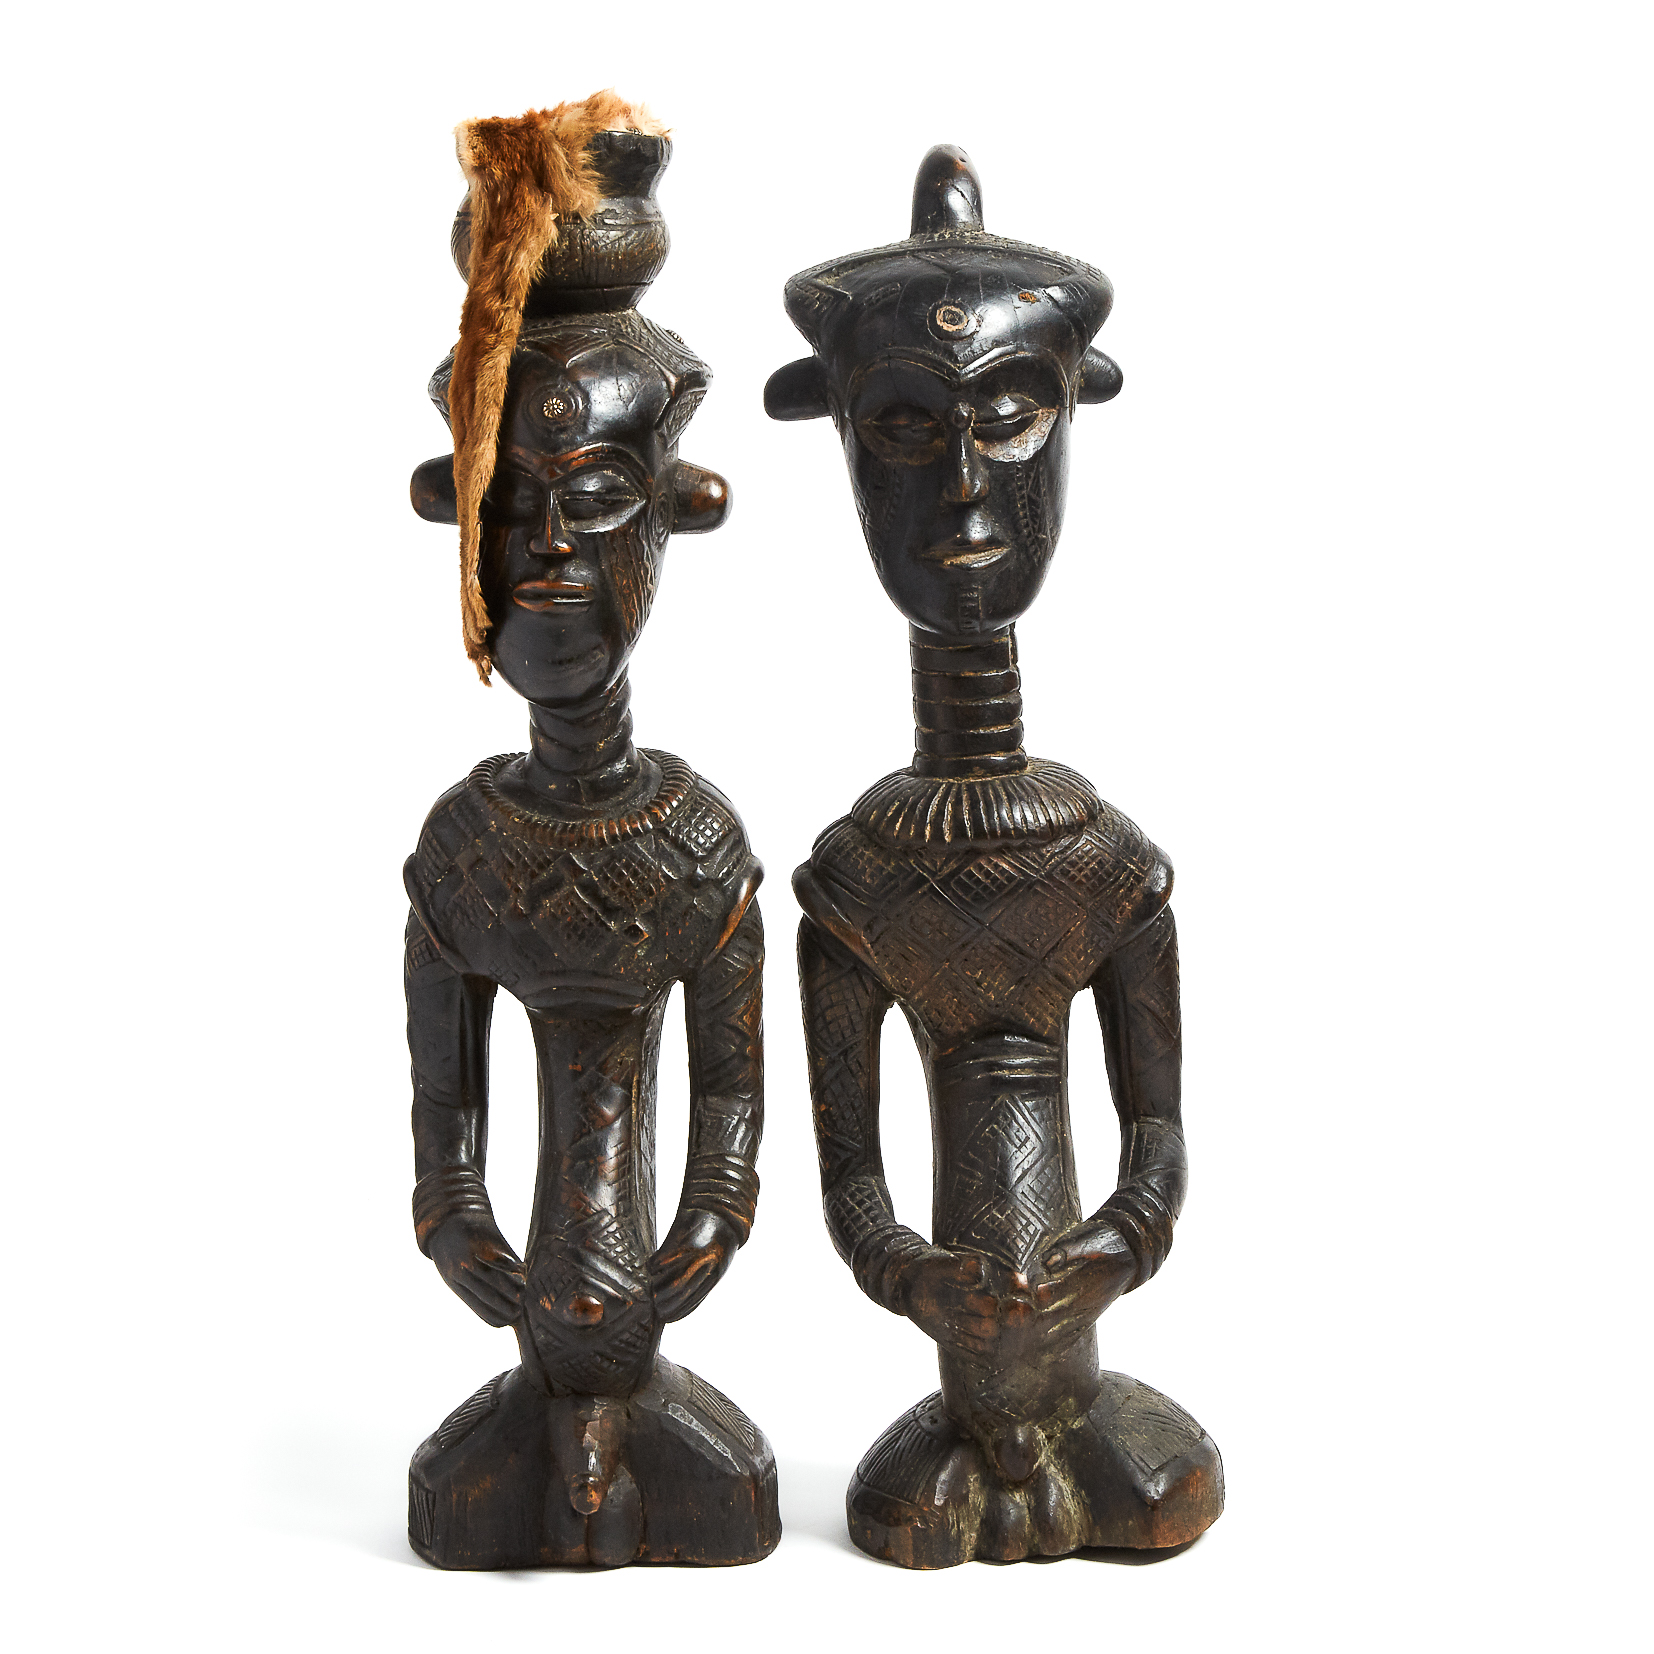 Pair of Dengese Ancestral Male and Female Figures, Democratic Republic of Congo, Central Africa